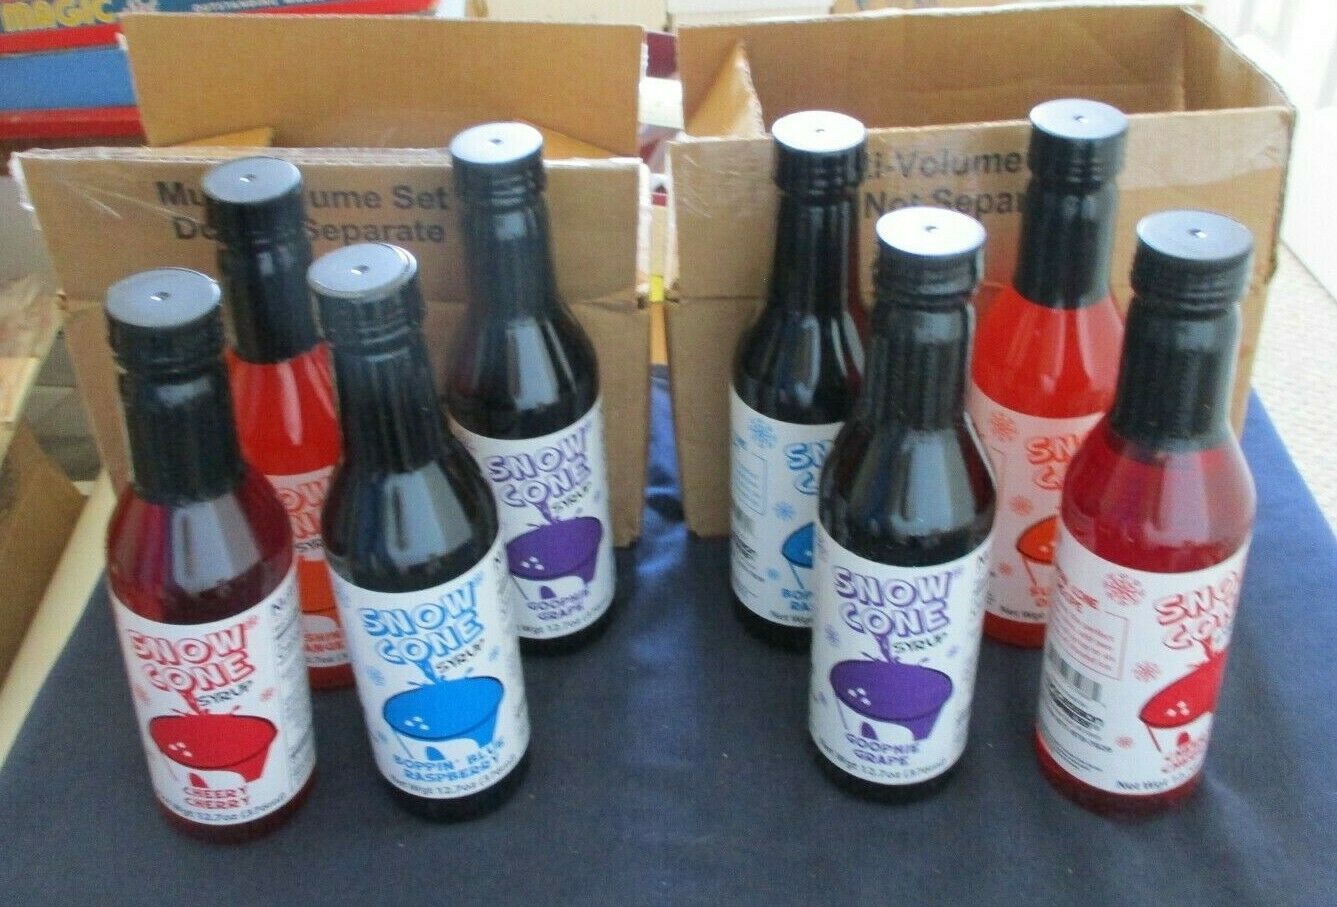 Lot of 2 New 12.7oz Snow Cone Syrup 4 Packs - 8 Bottles Total